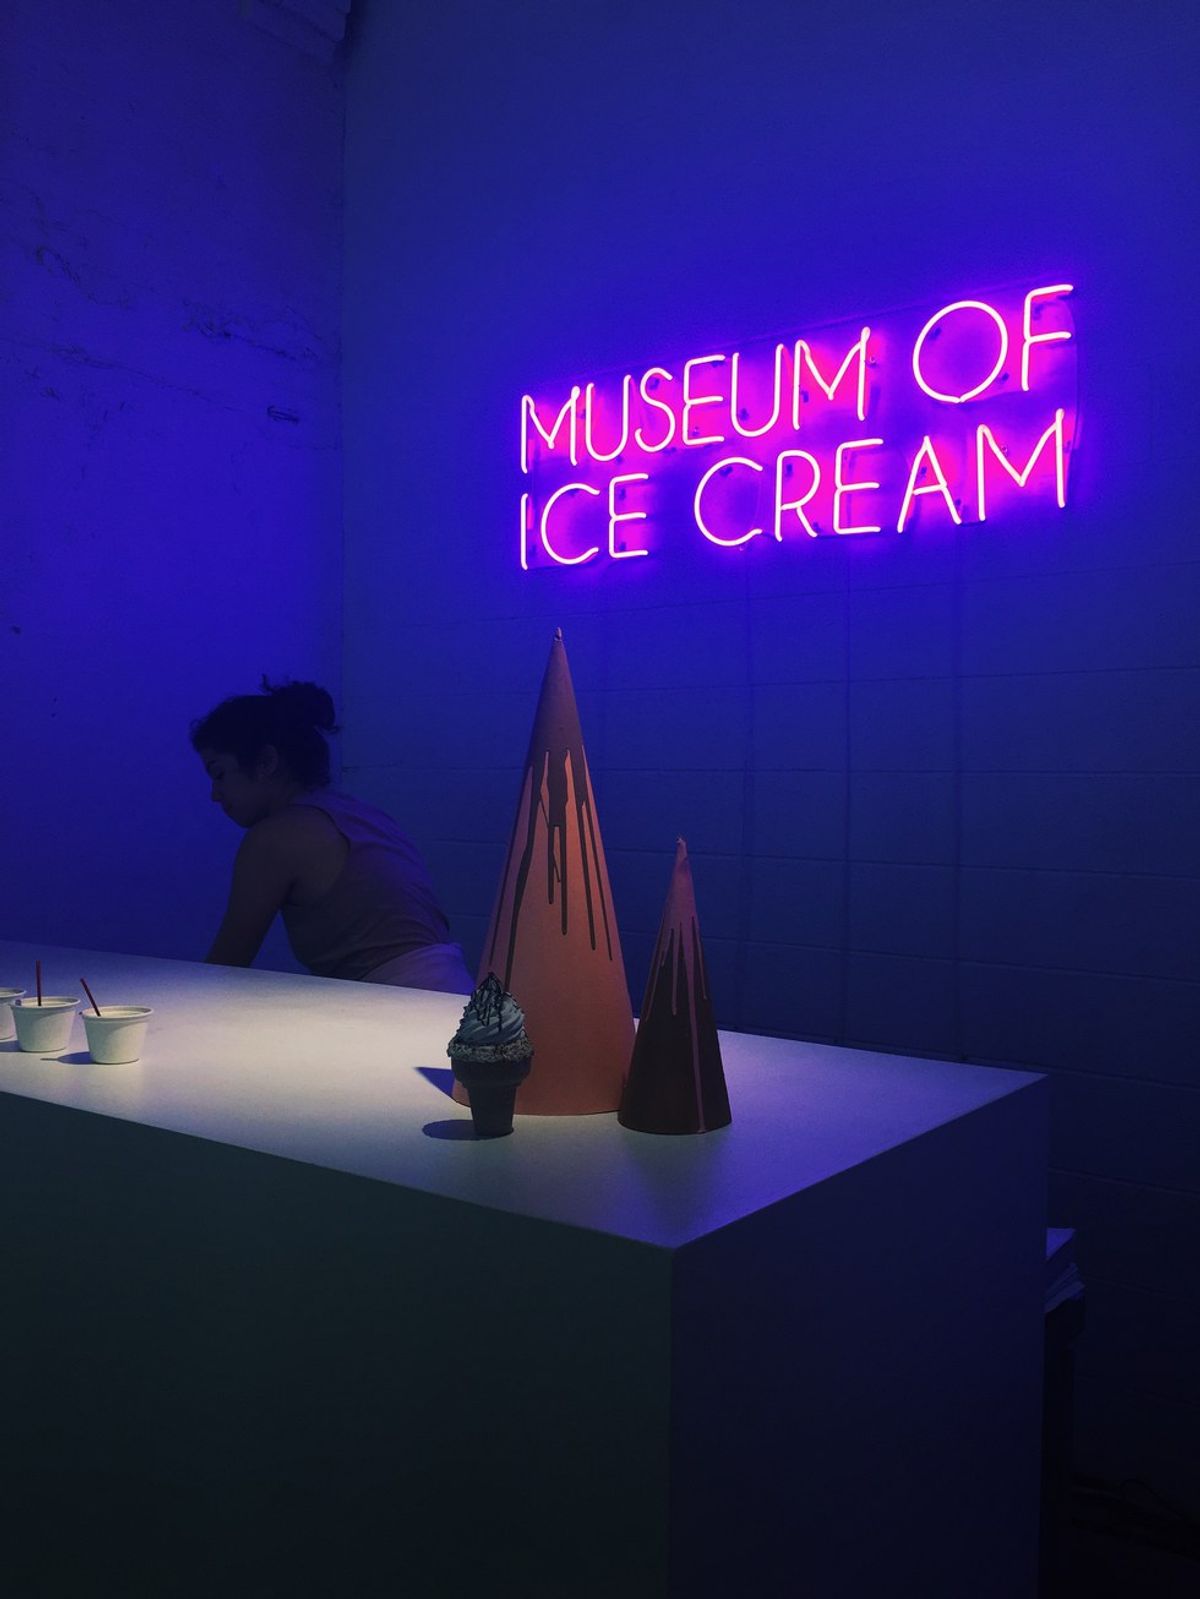 Finding the Best Ice Cream in NYC: The Museum of Ice Cream